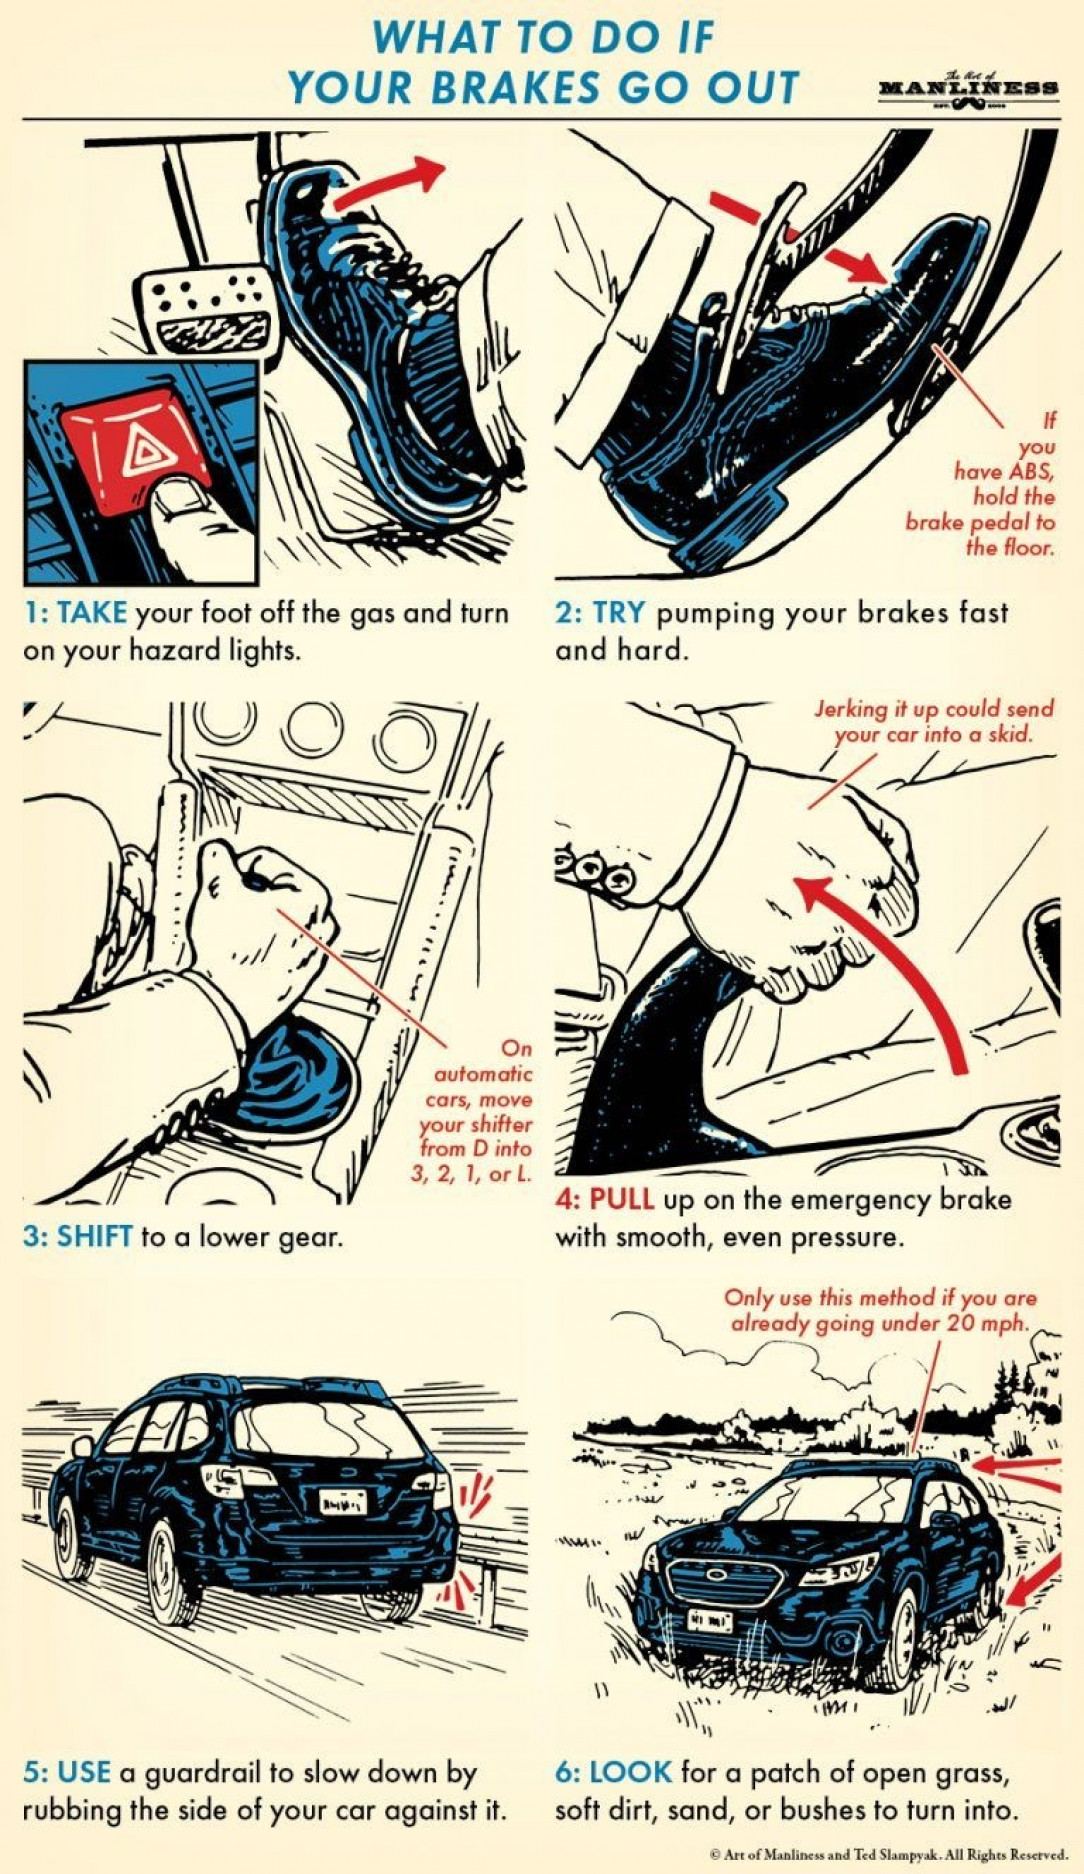 What to do if brakes go out